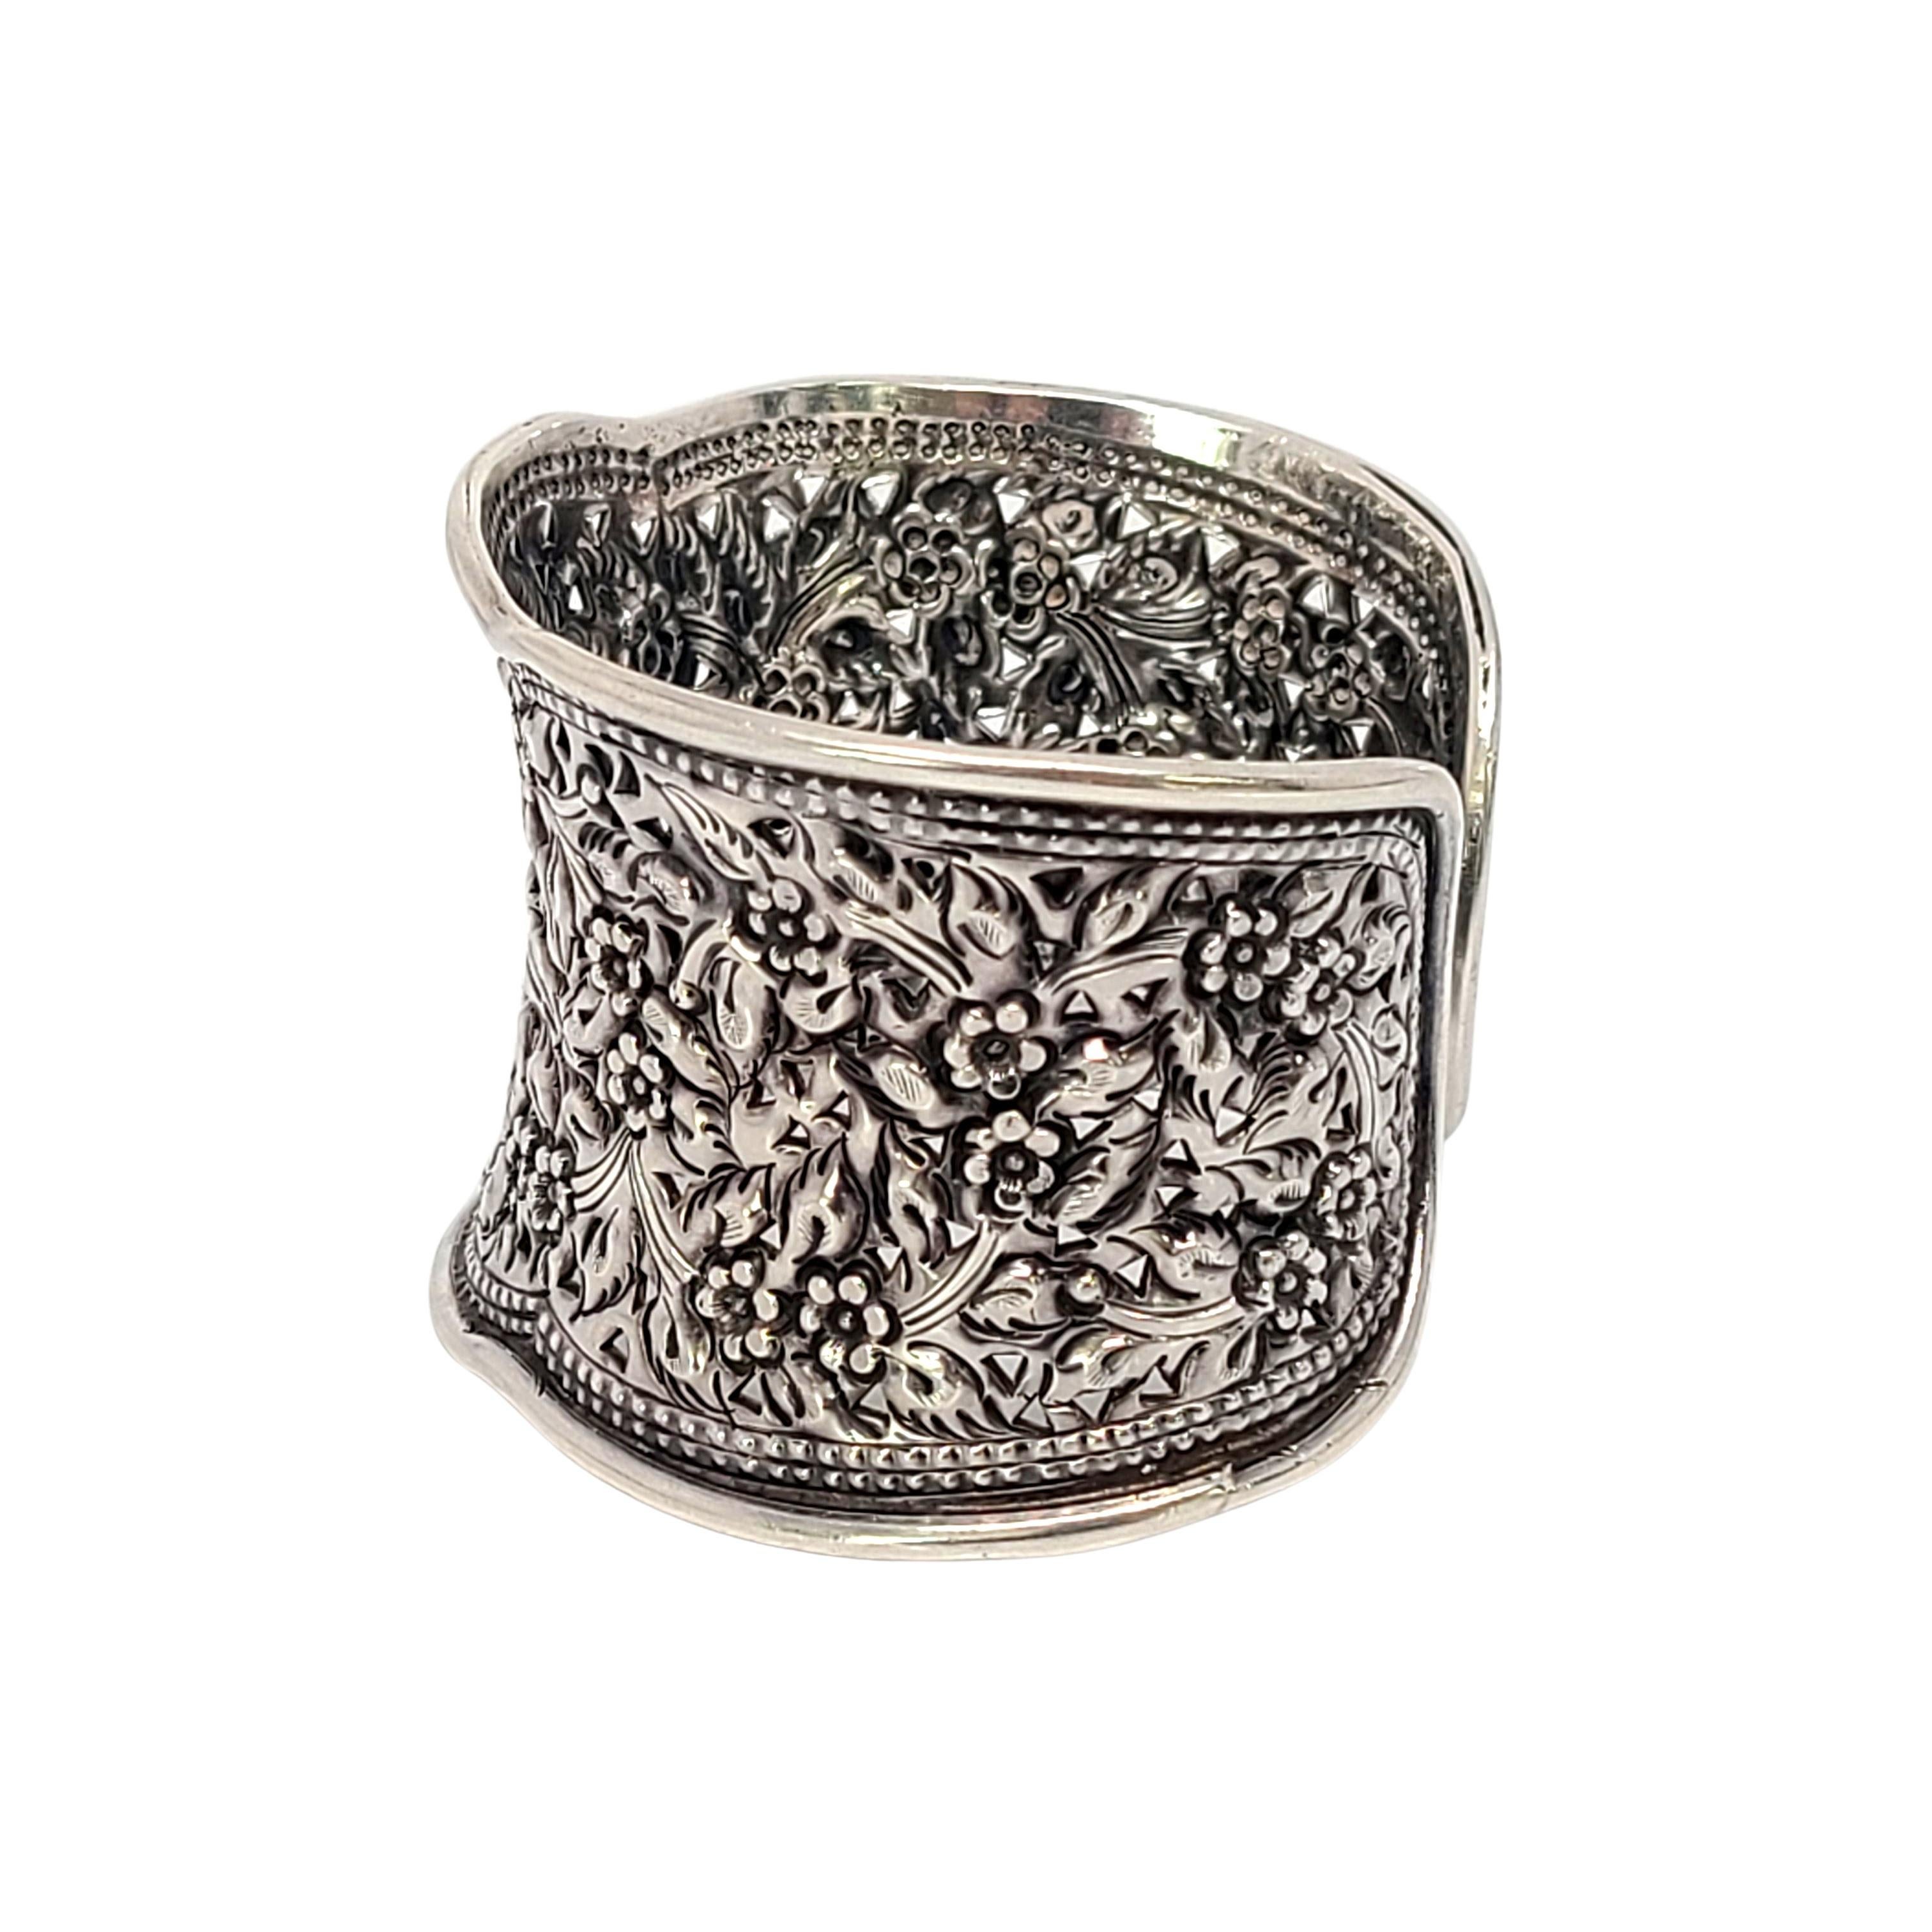 Sterling silver wide floral design cuff bracelet.

Beautiful repousse flower and leaf design with small cut-outs.

Measures approx 6 1/2